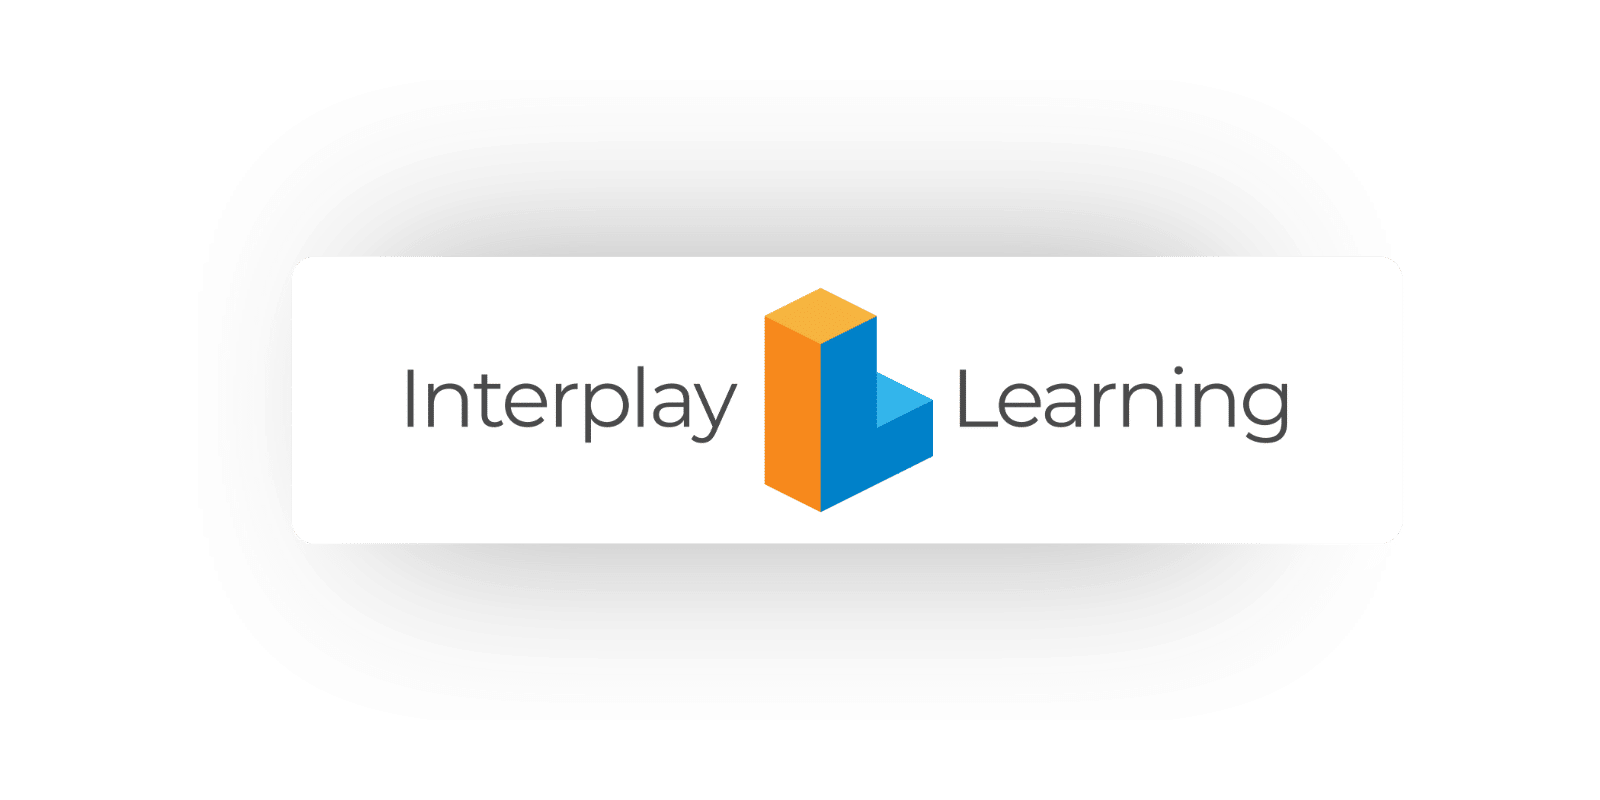 Our partnership embeds Interplay’s vast library of maintenance training seamlessly into Grace Hill’s training platform without the need for extra connection steps. Now, Grace Hill clients can add 230 Interplay immersive courses to the typical learning paths they create.